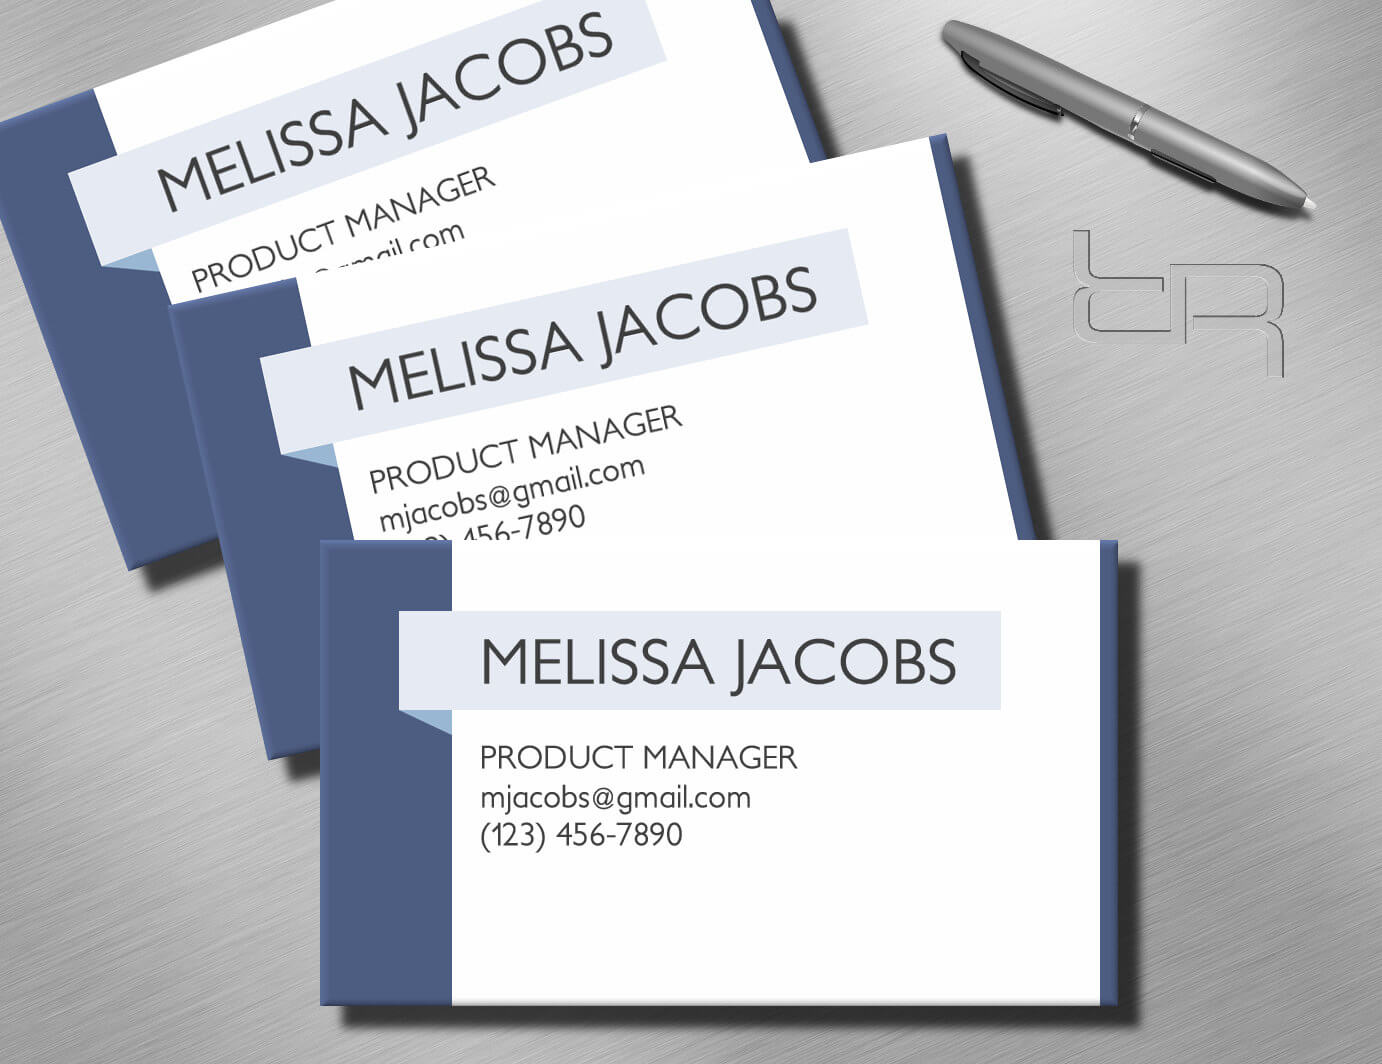 Southworth Business Card Template ] - Printingforless Com Within Southworth Business Card Template